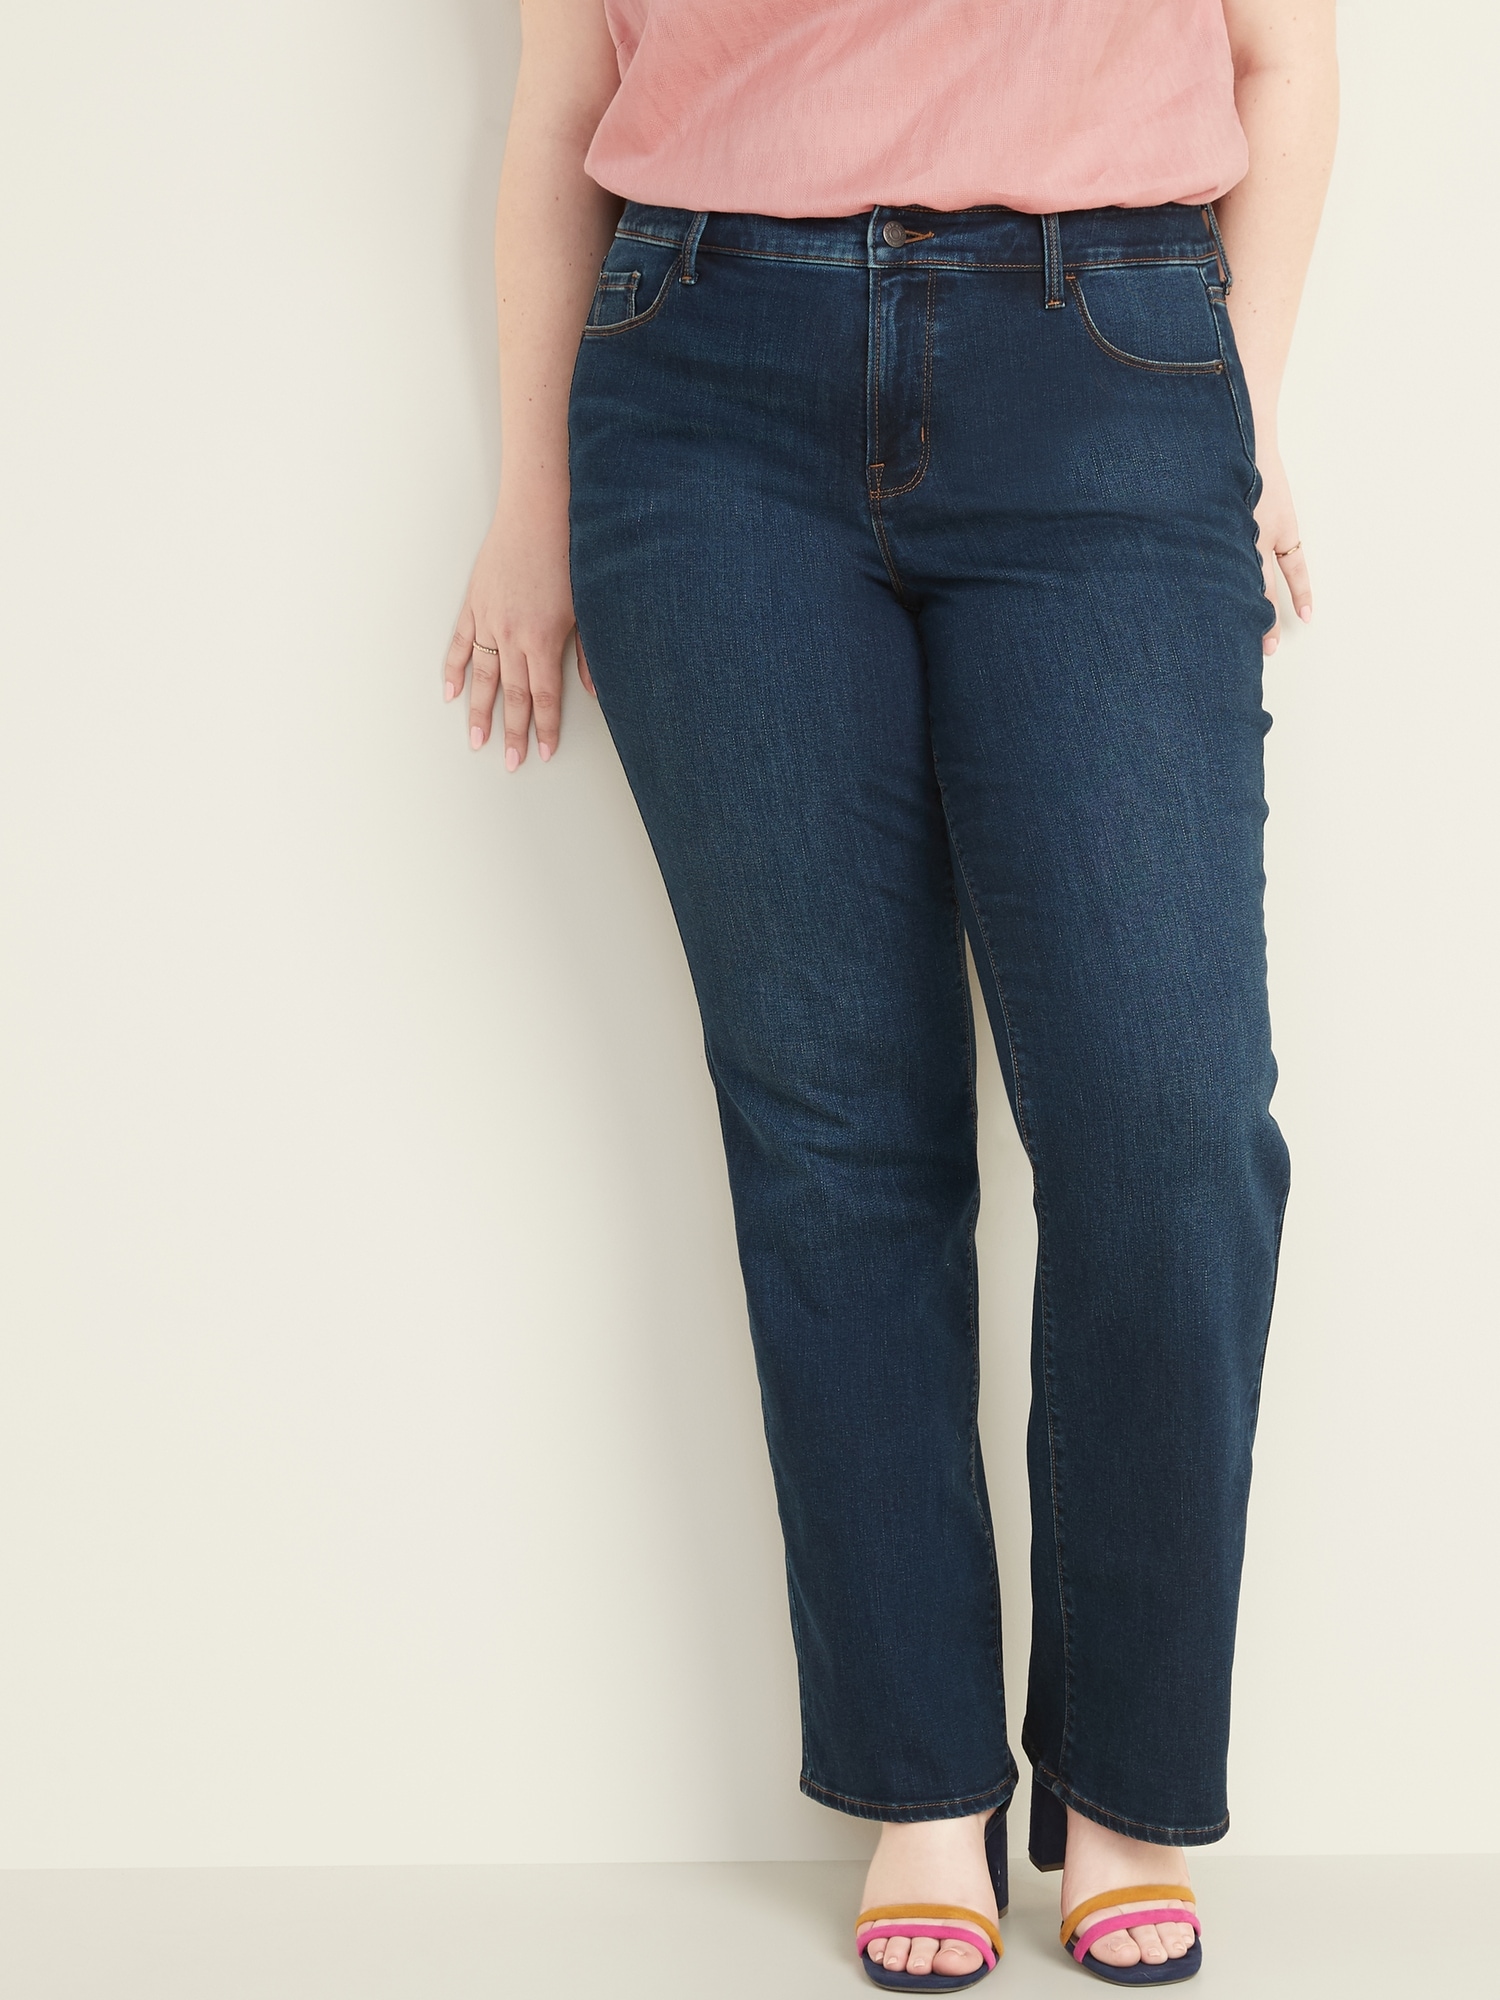 plus size jeans at old navy